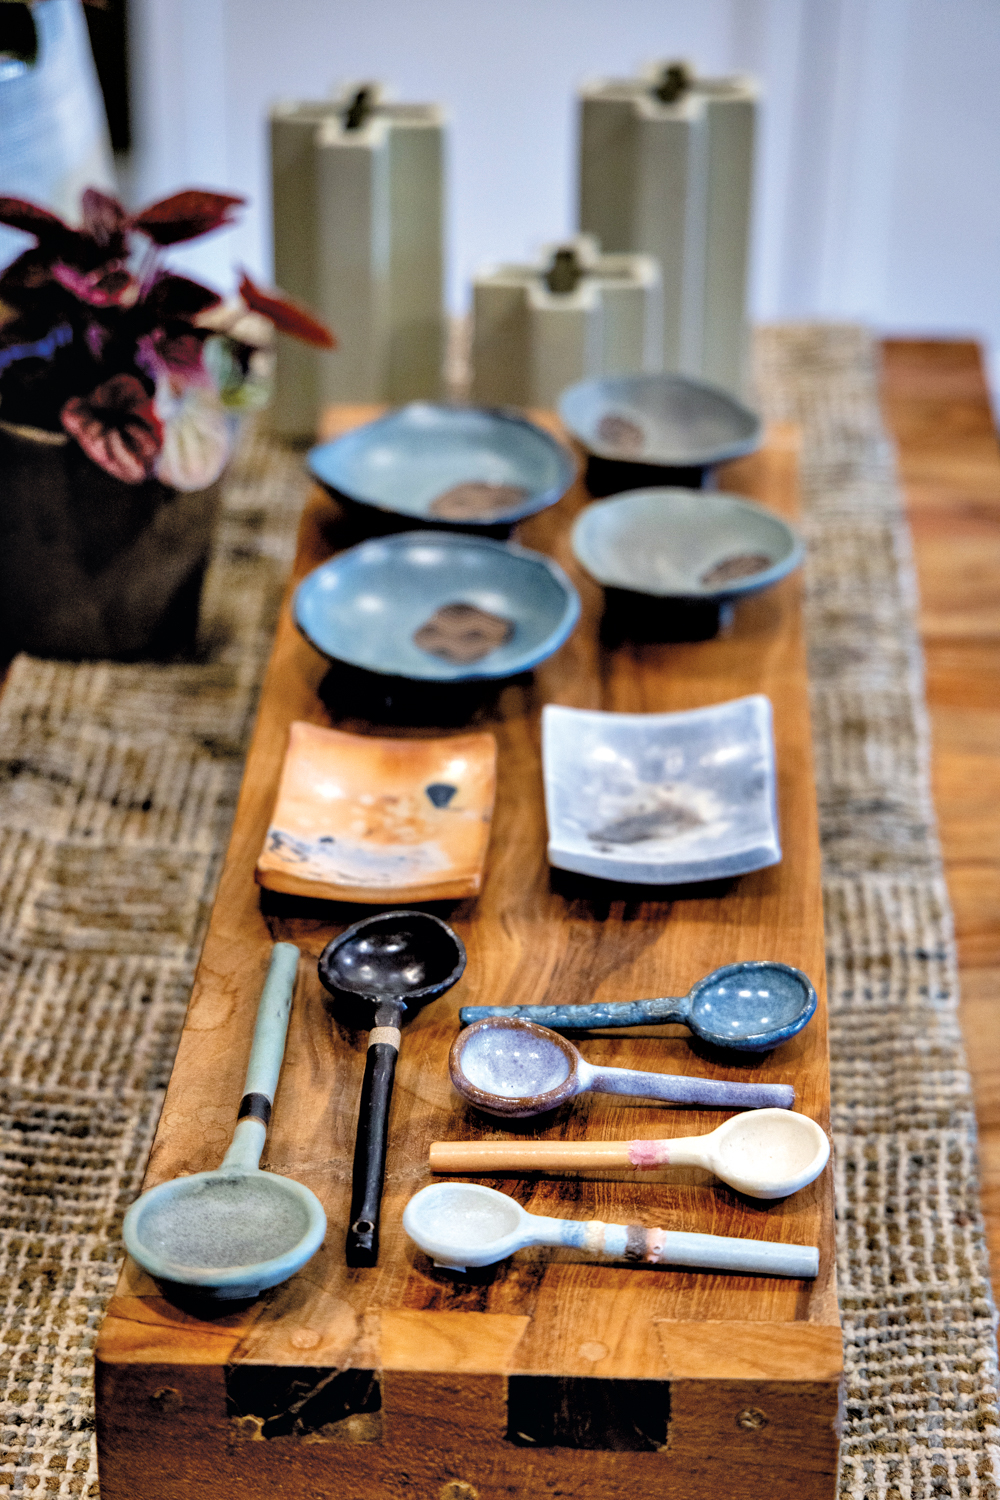 handmade ceramic dishes and spoons atop a wood plank